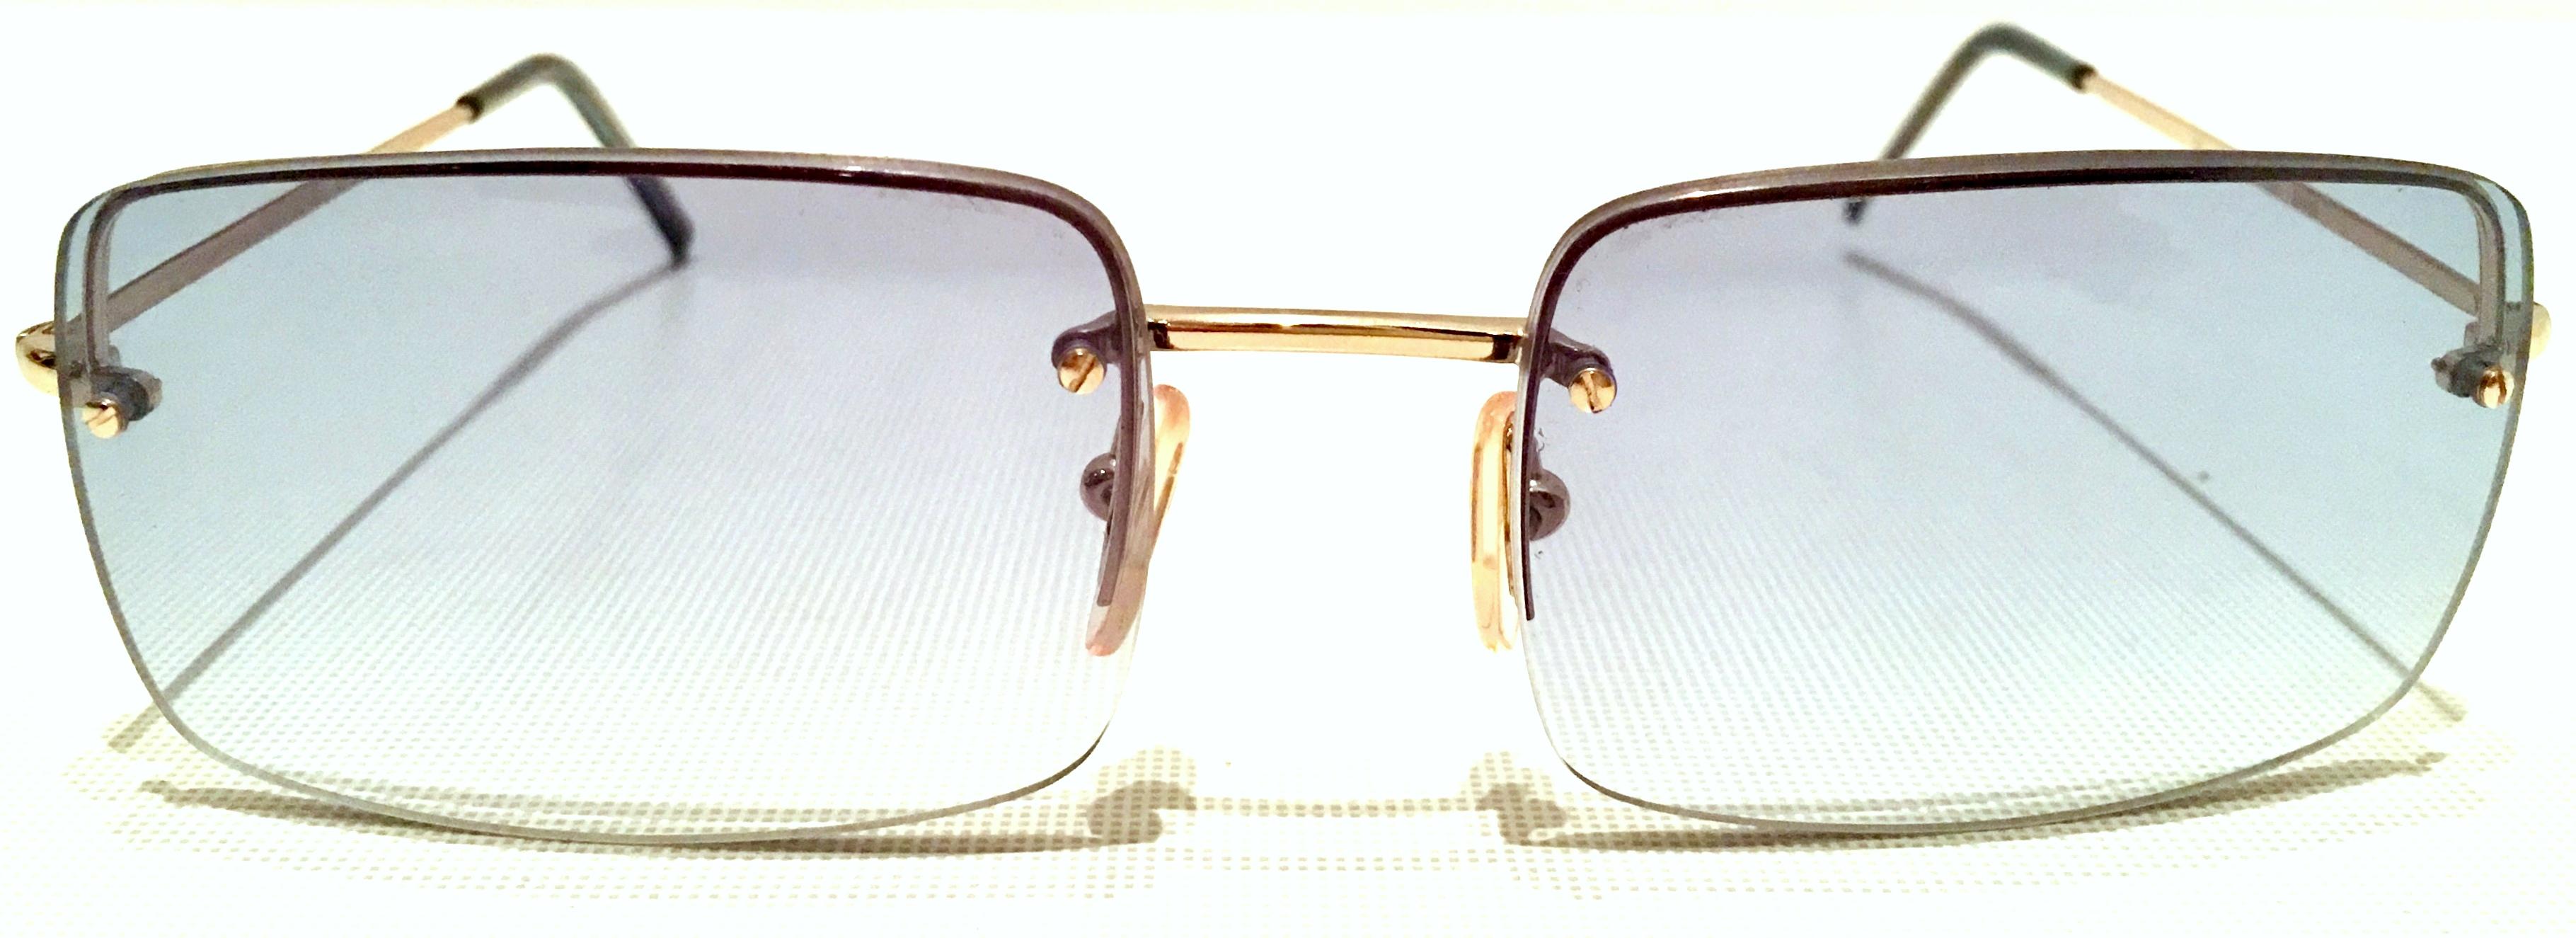 1980'S Italian 22K Gold Plate & Blue square rimless sunglasses By, Gucci. Includes authentic Gucci hard protective carrying case. Features the GUCCI logo on each exterior exterior arm. Signed on the interior, Made In Italy-Gucci.